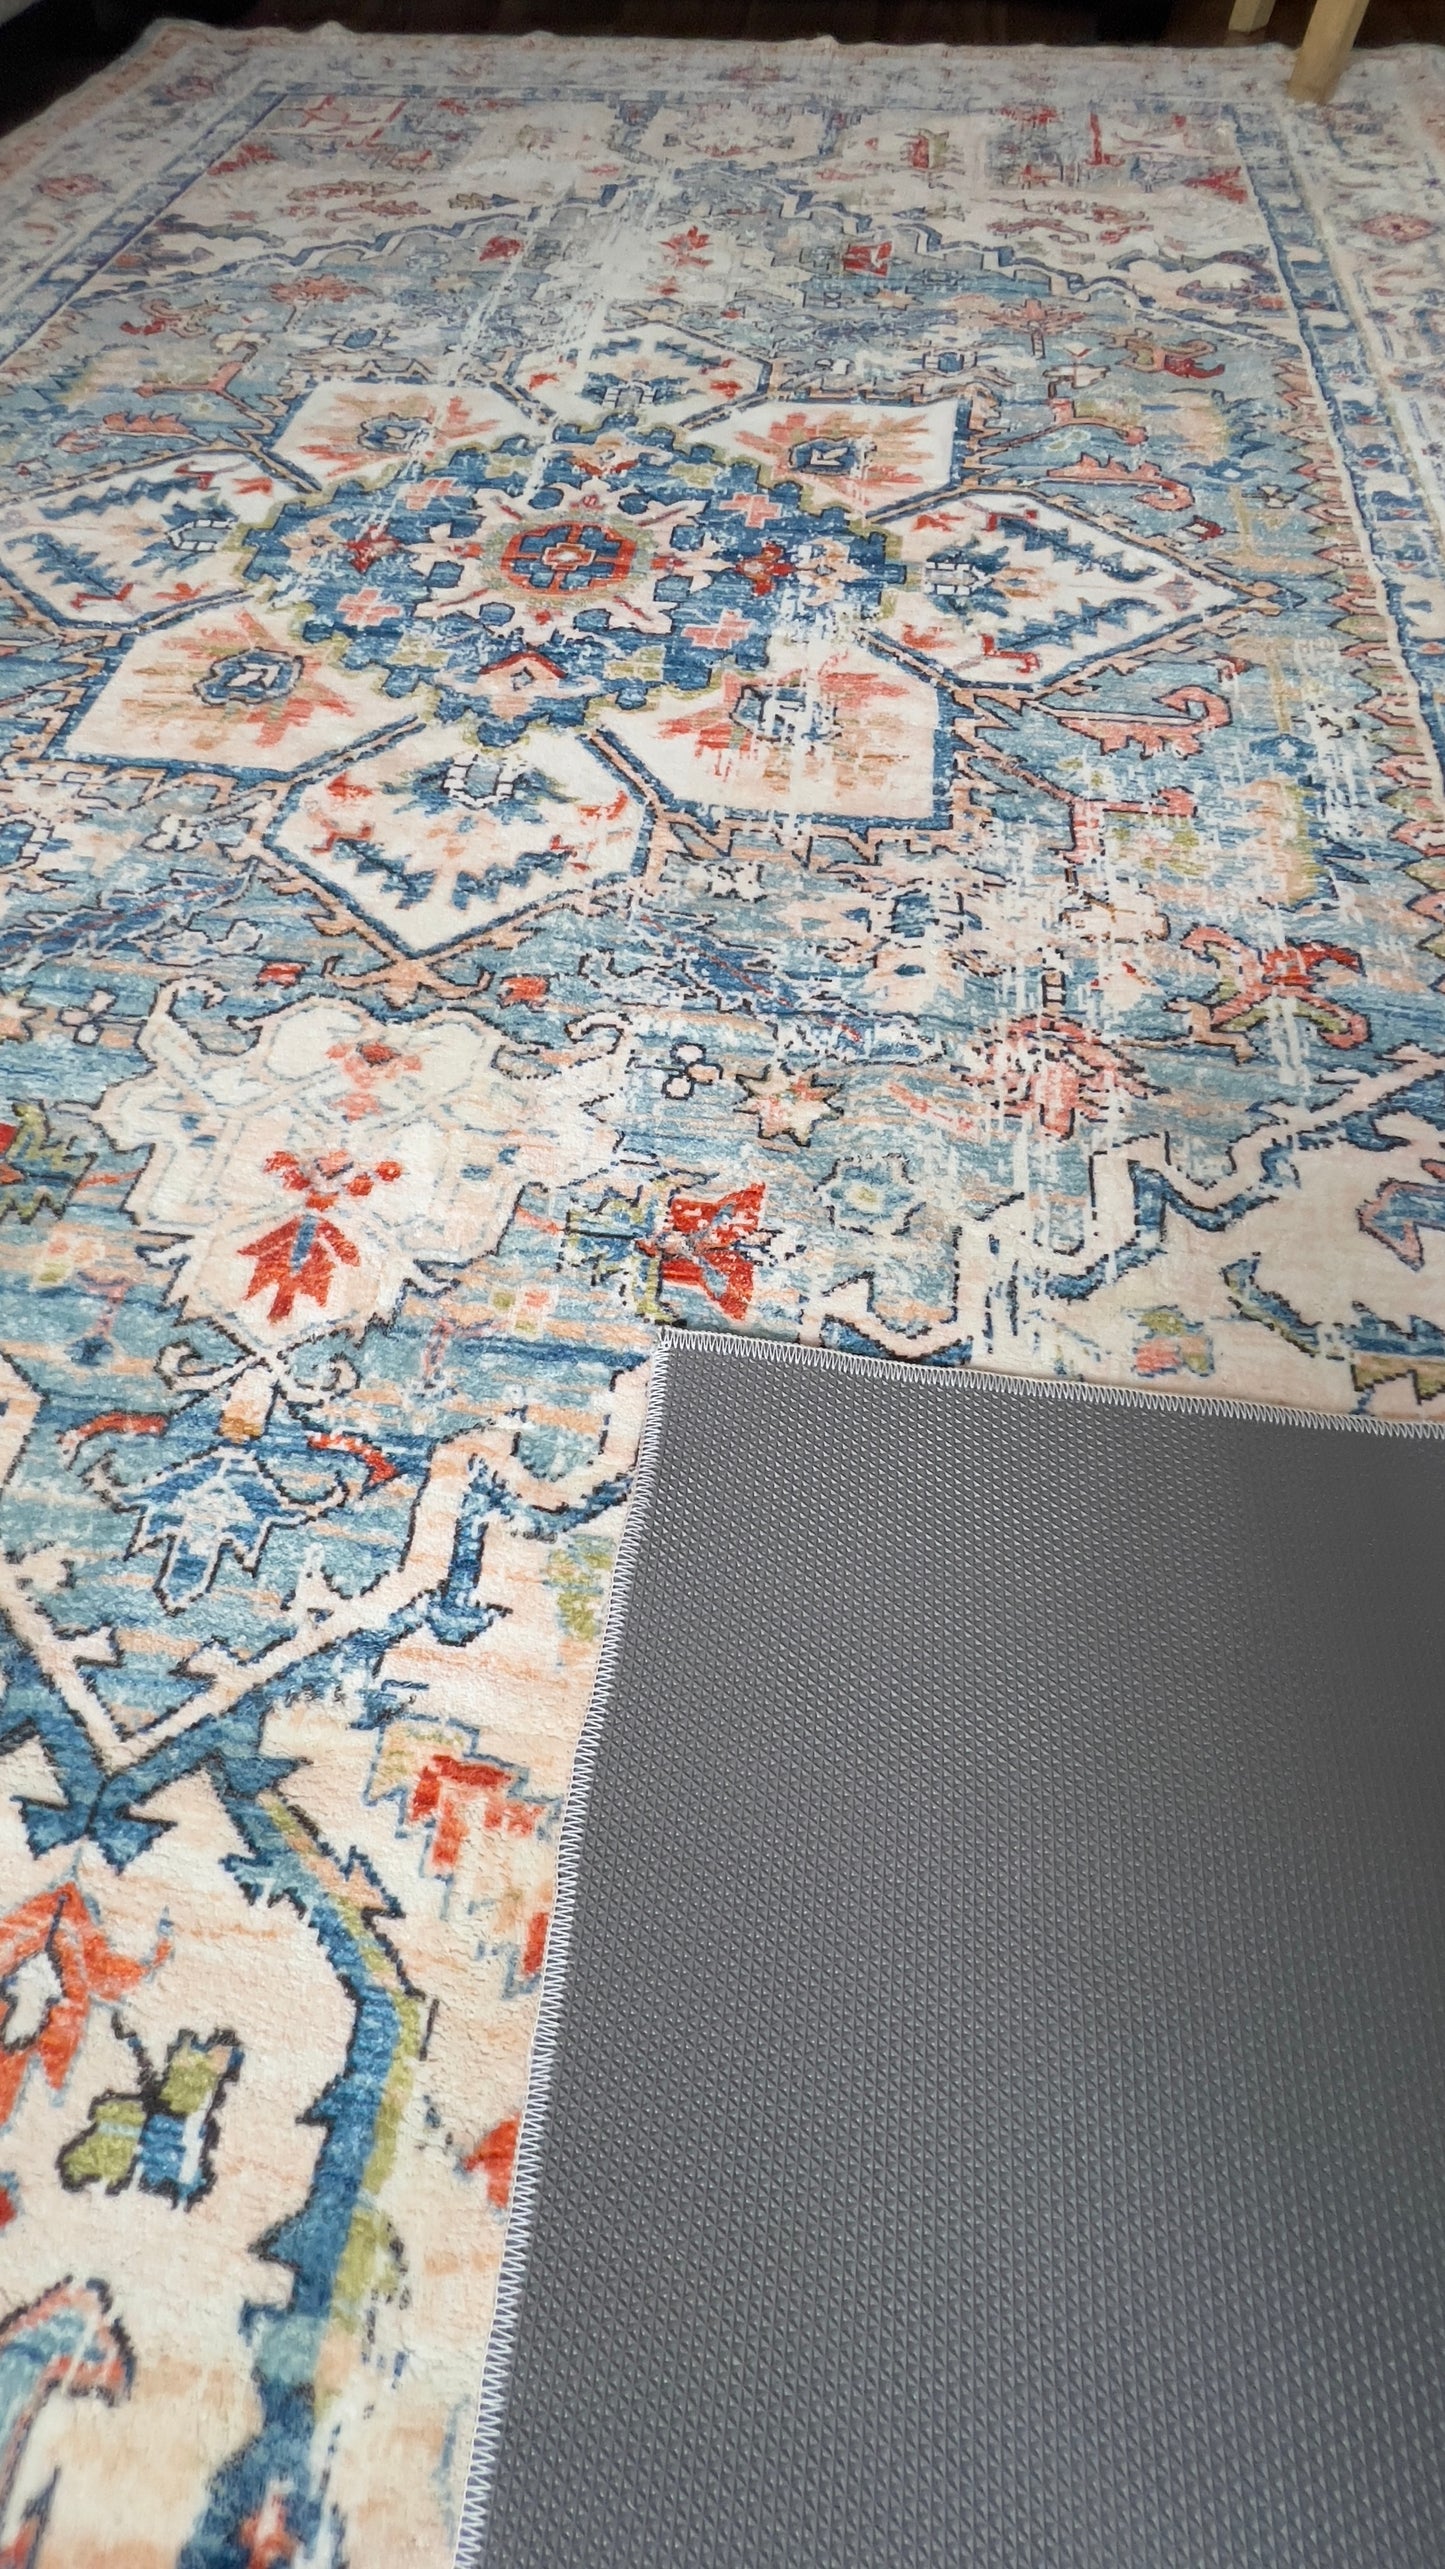 Convenience Meets Tradition: Explore Washable Persian Rugs